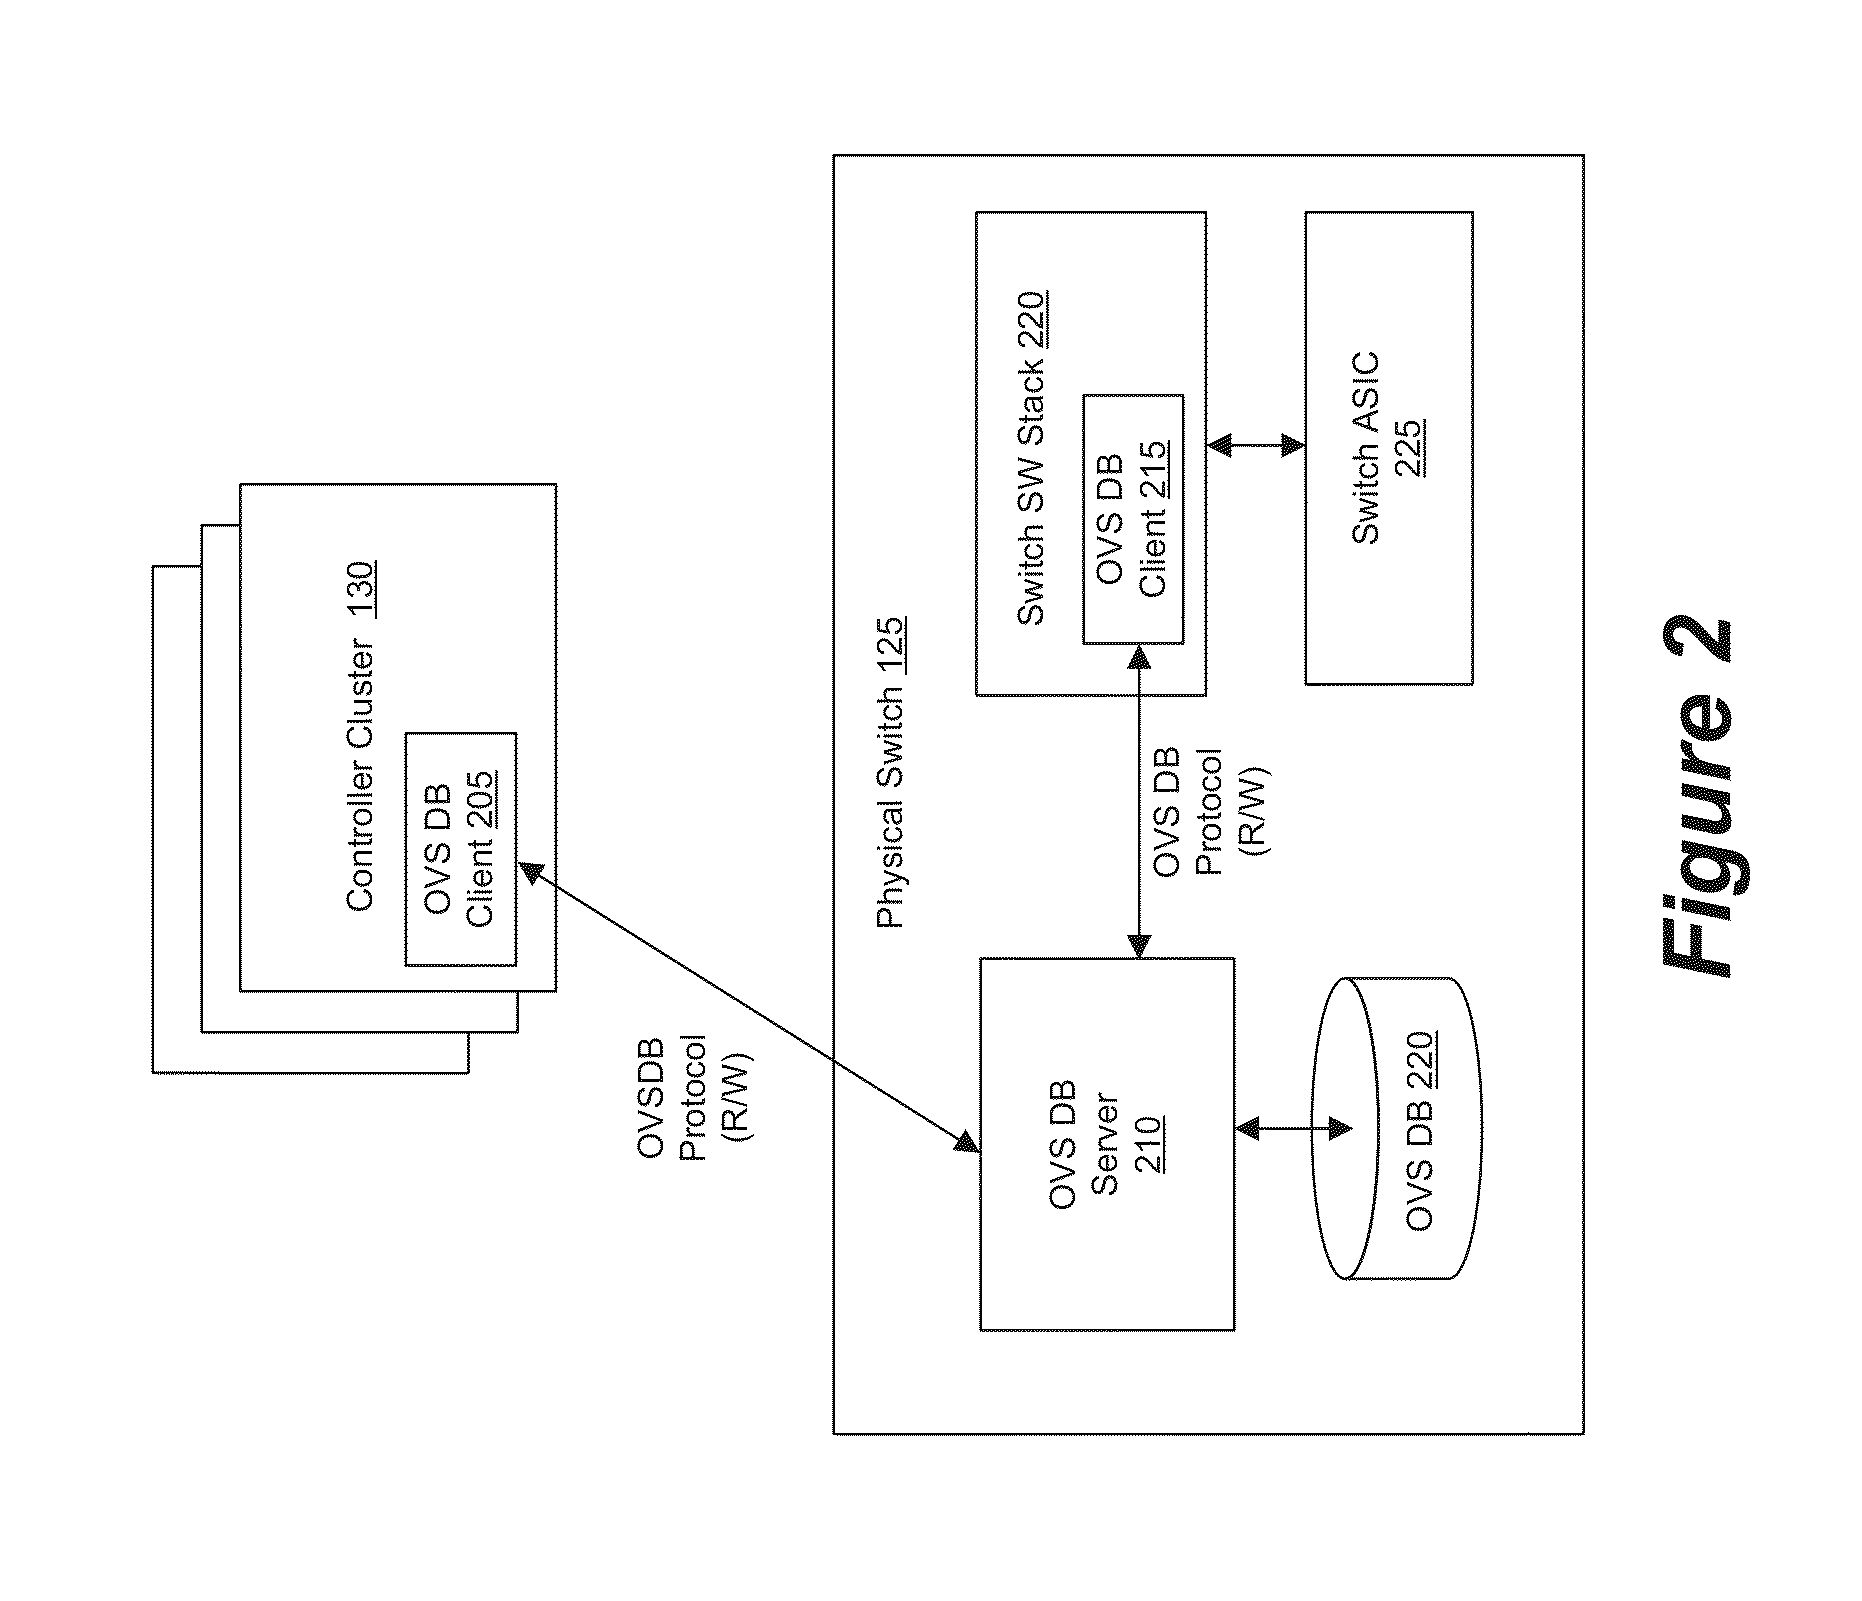 Managing software and hardware forwarding elements to define virtual networks